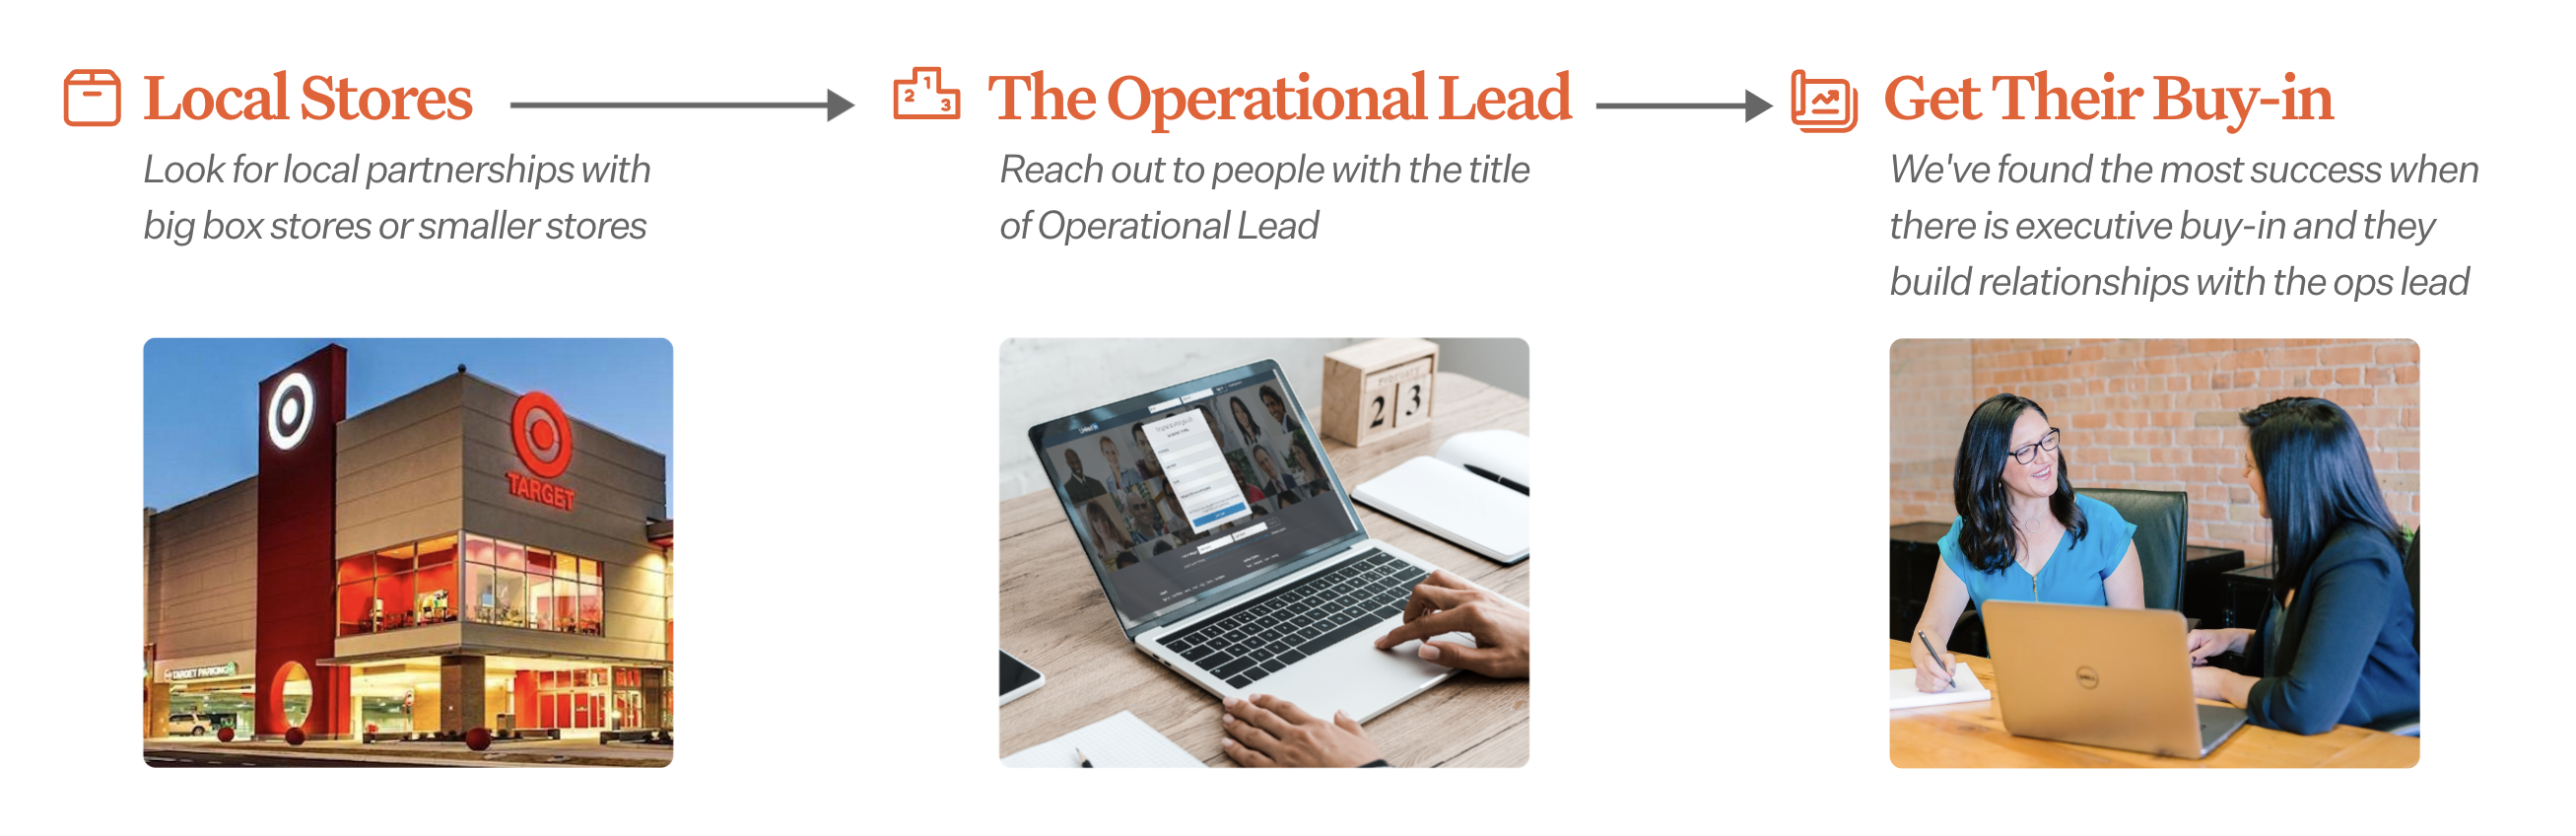 Outreach to the Operational Lead